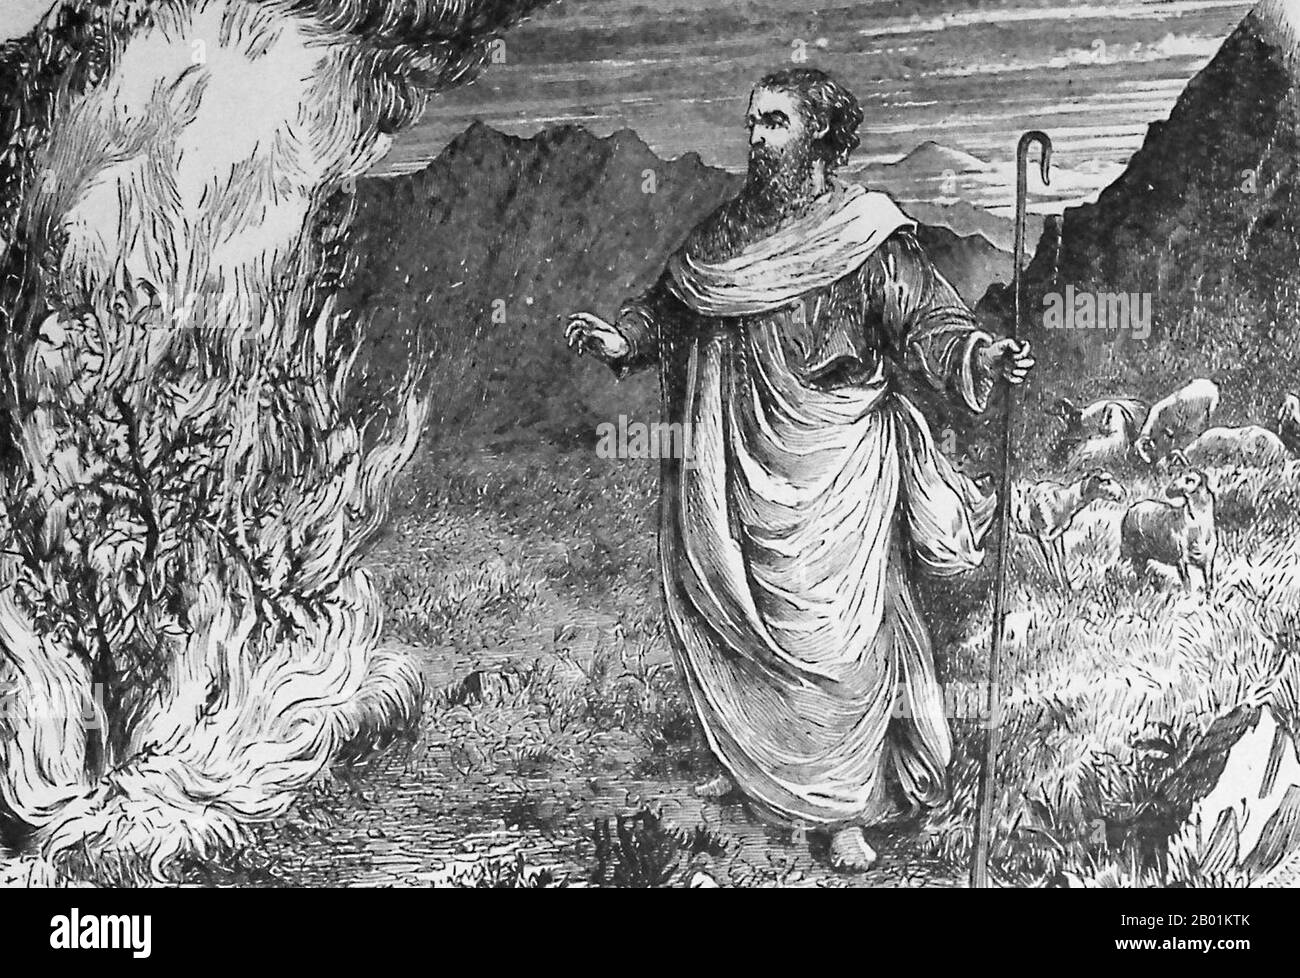 USA: 'Moses and the Burning Bush'. Illustration from the Holman Bible, 1890.  The burning bush is an object described by the Book of Exodus (3:1-21) as being located on Mount Sinai; according to the narrative, the bush was on fire, but was not consumed by the flames, hence the name.  In the narrative, the burning bush is the location at which Moses was appointed by God to lead the Israelites out of Egypt and into Canaan. Stock Photo